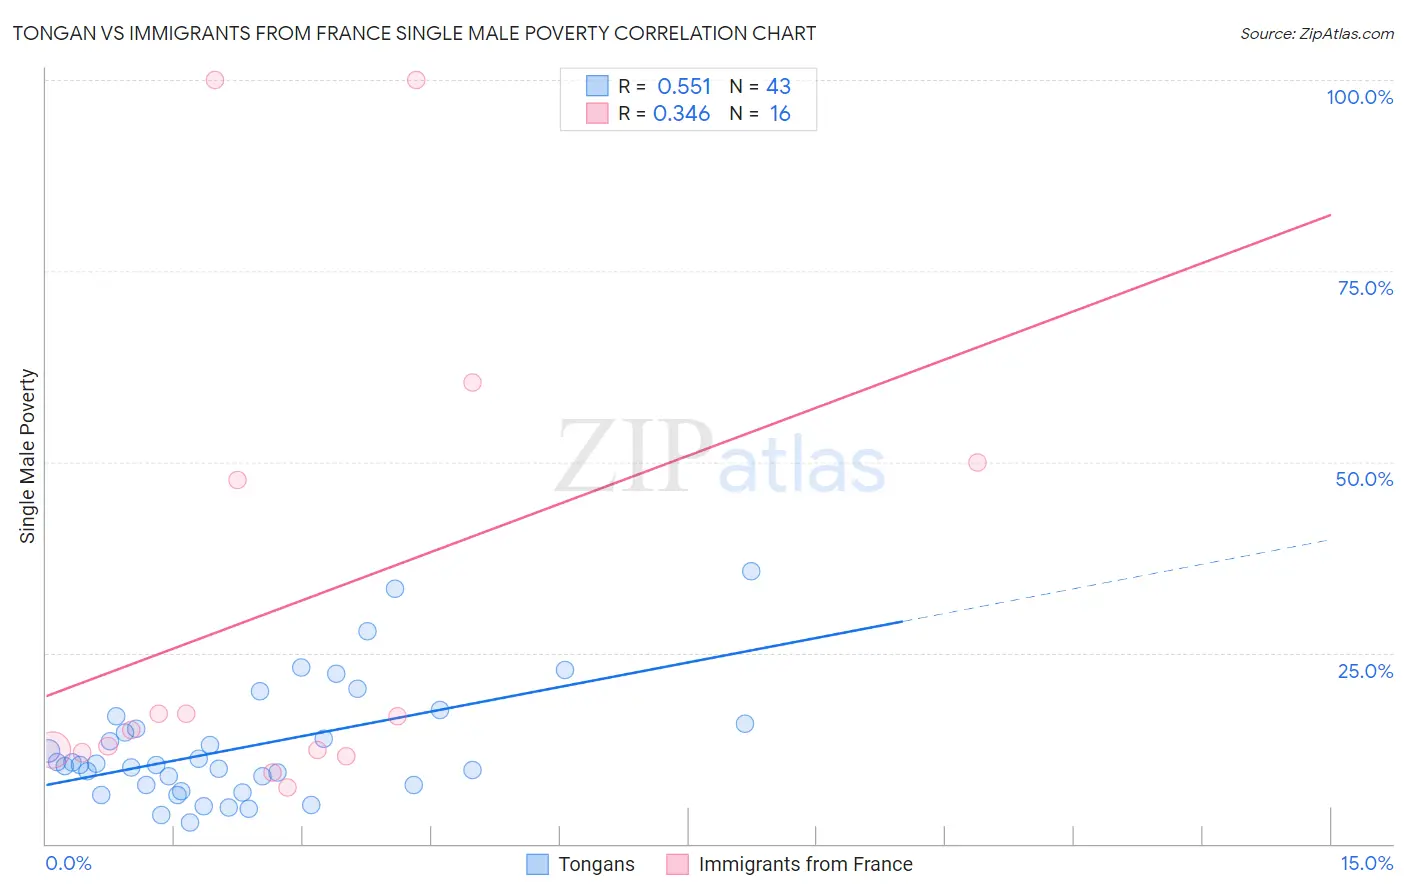 Tongan vs Immigrants from France Single Male Poverty